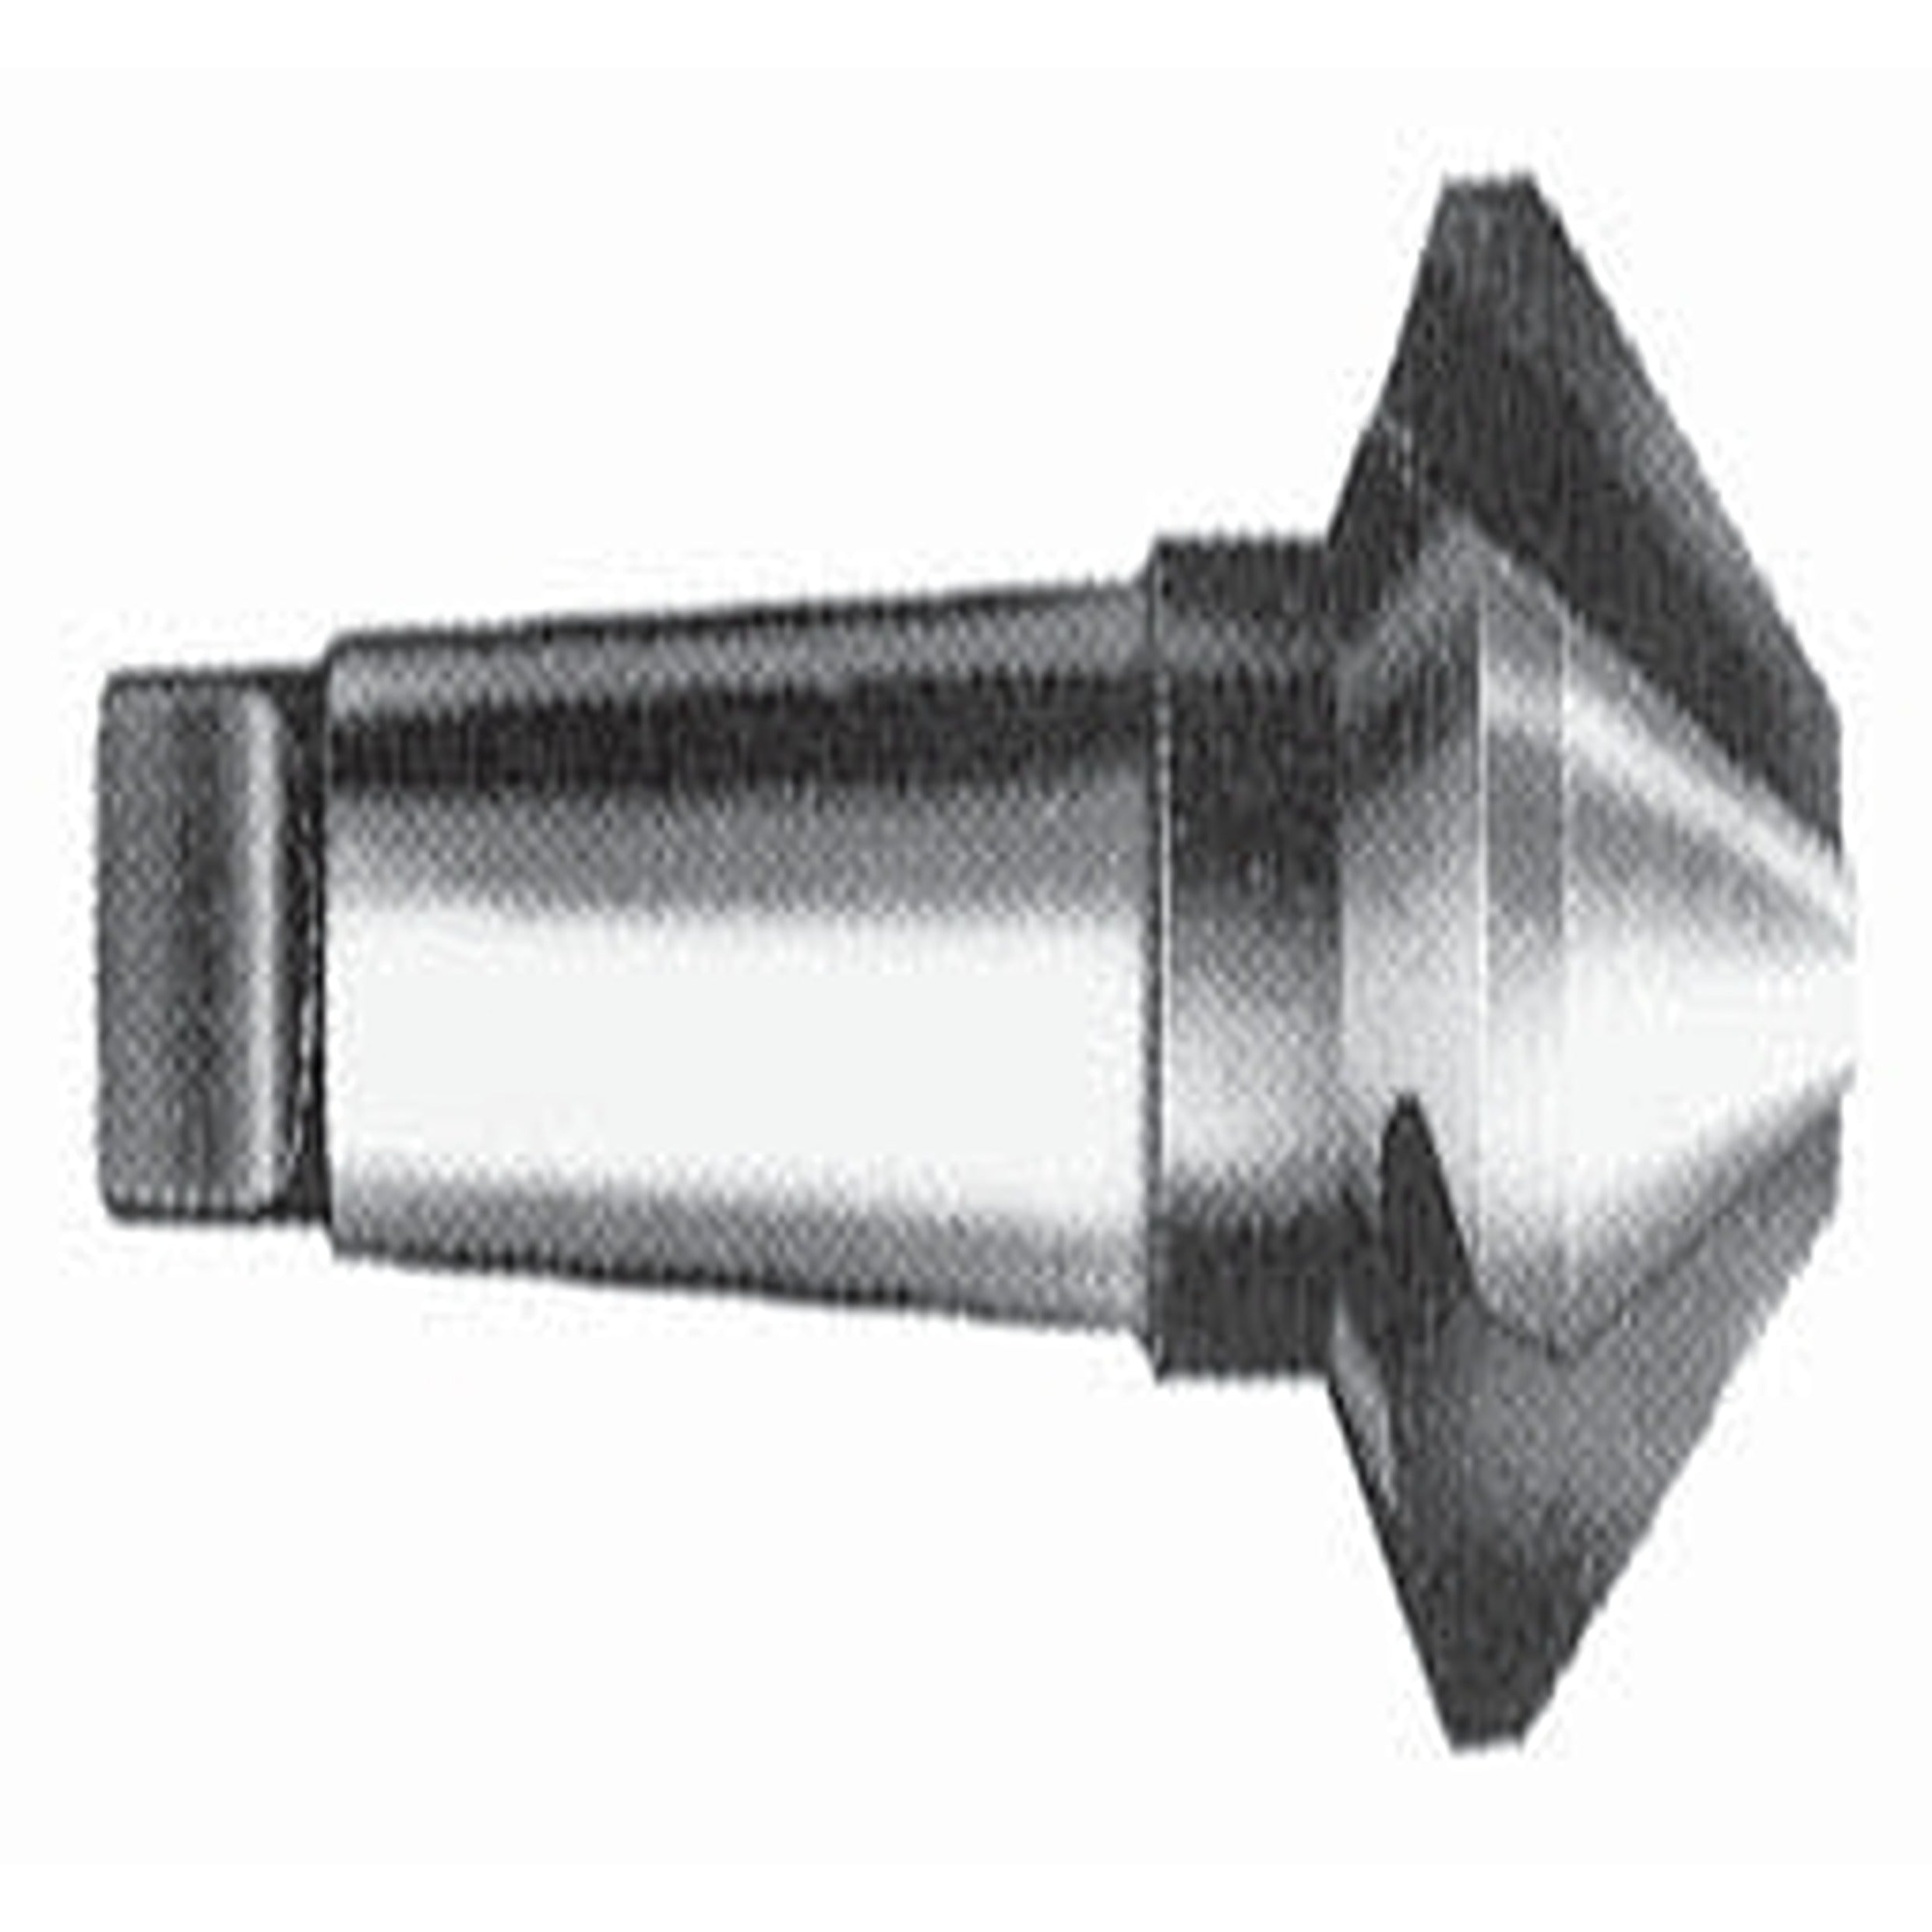 YEW AIK AG02105 H.S.S Taper Shank 3 Flutes Countersink (G105) - Premium H.S.S Taper Shank 3 Flutes Countersink from YEW AIK - Shop now at Yew Aik.